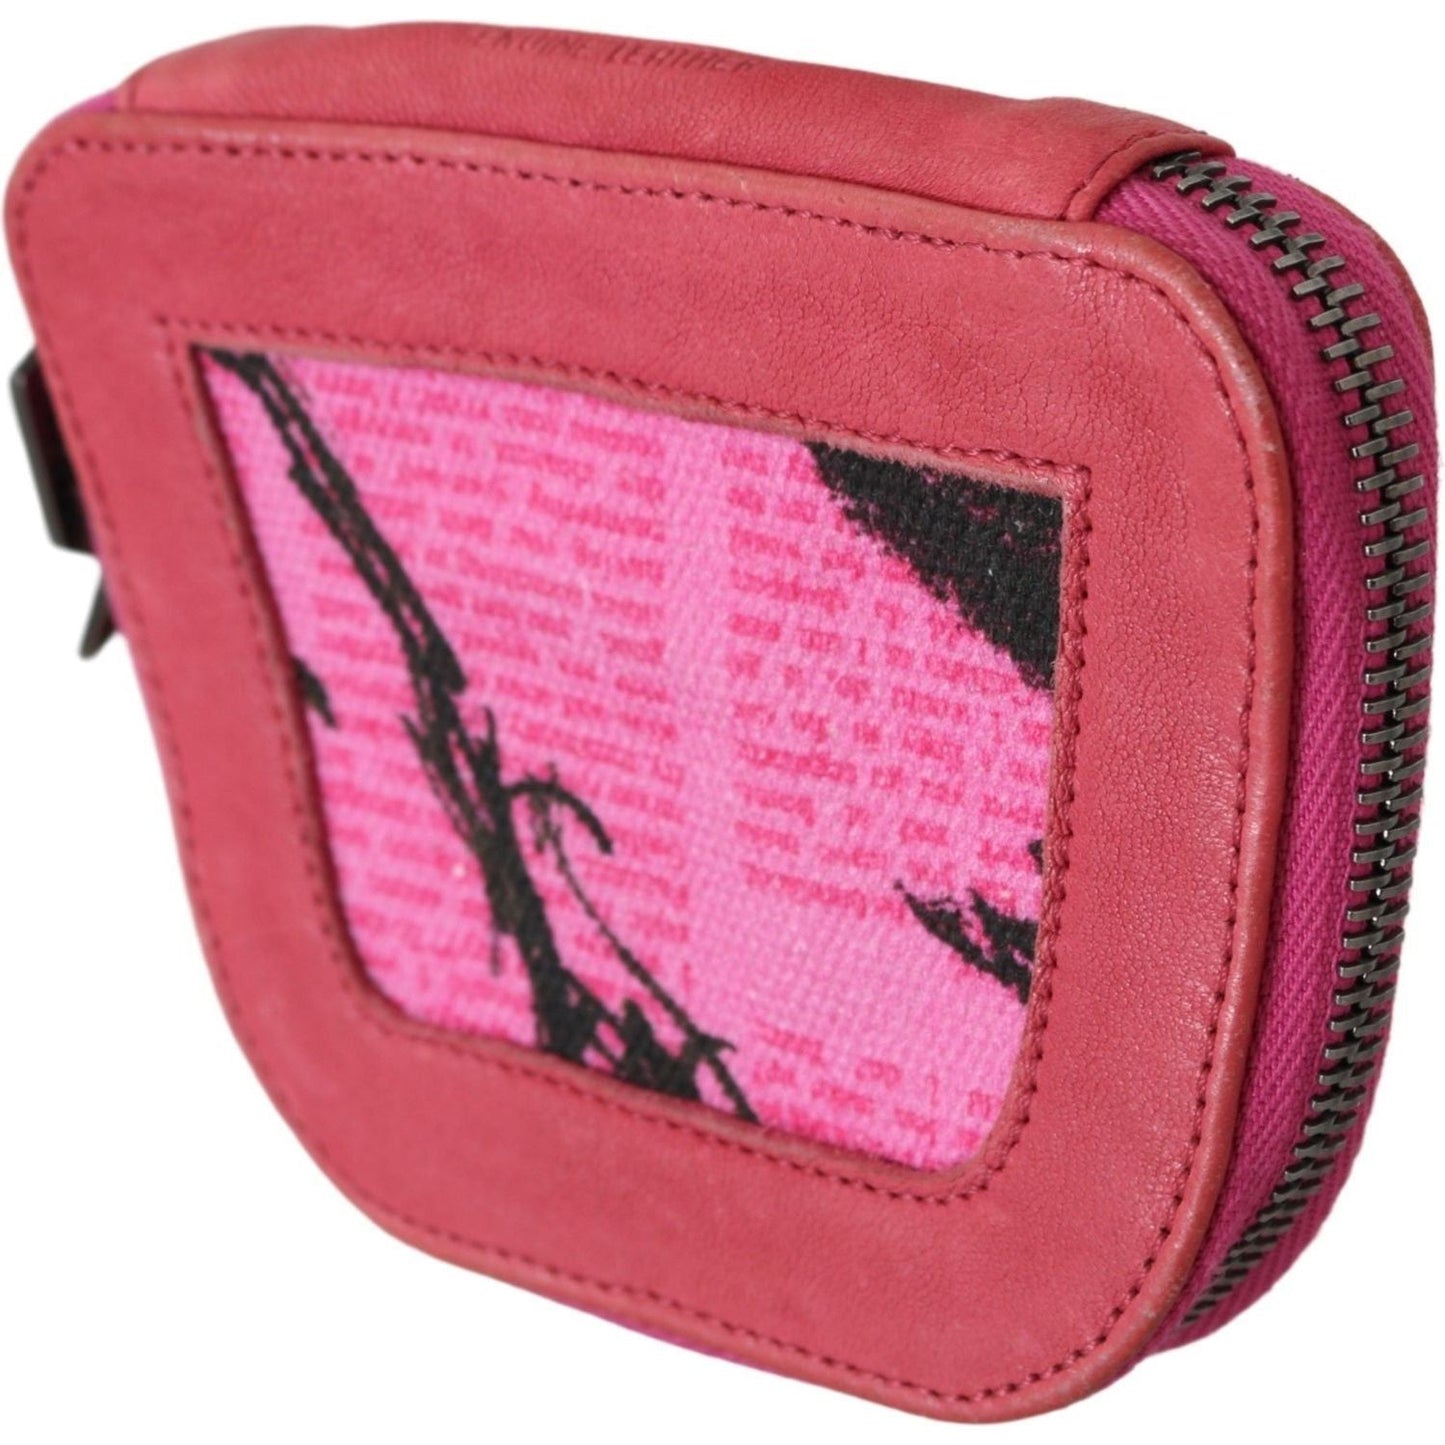 PINKO Elegant Pink Fabric Coin Wallet pink-suede-printed-coin-holder-women-fabric-zippered-purse Purse IMG_0182-231f49a7-3fd.jpg